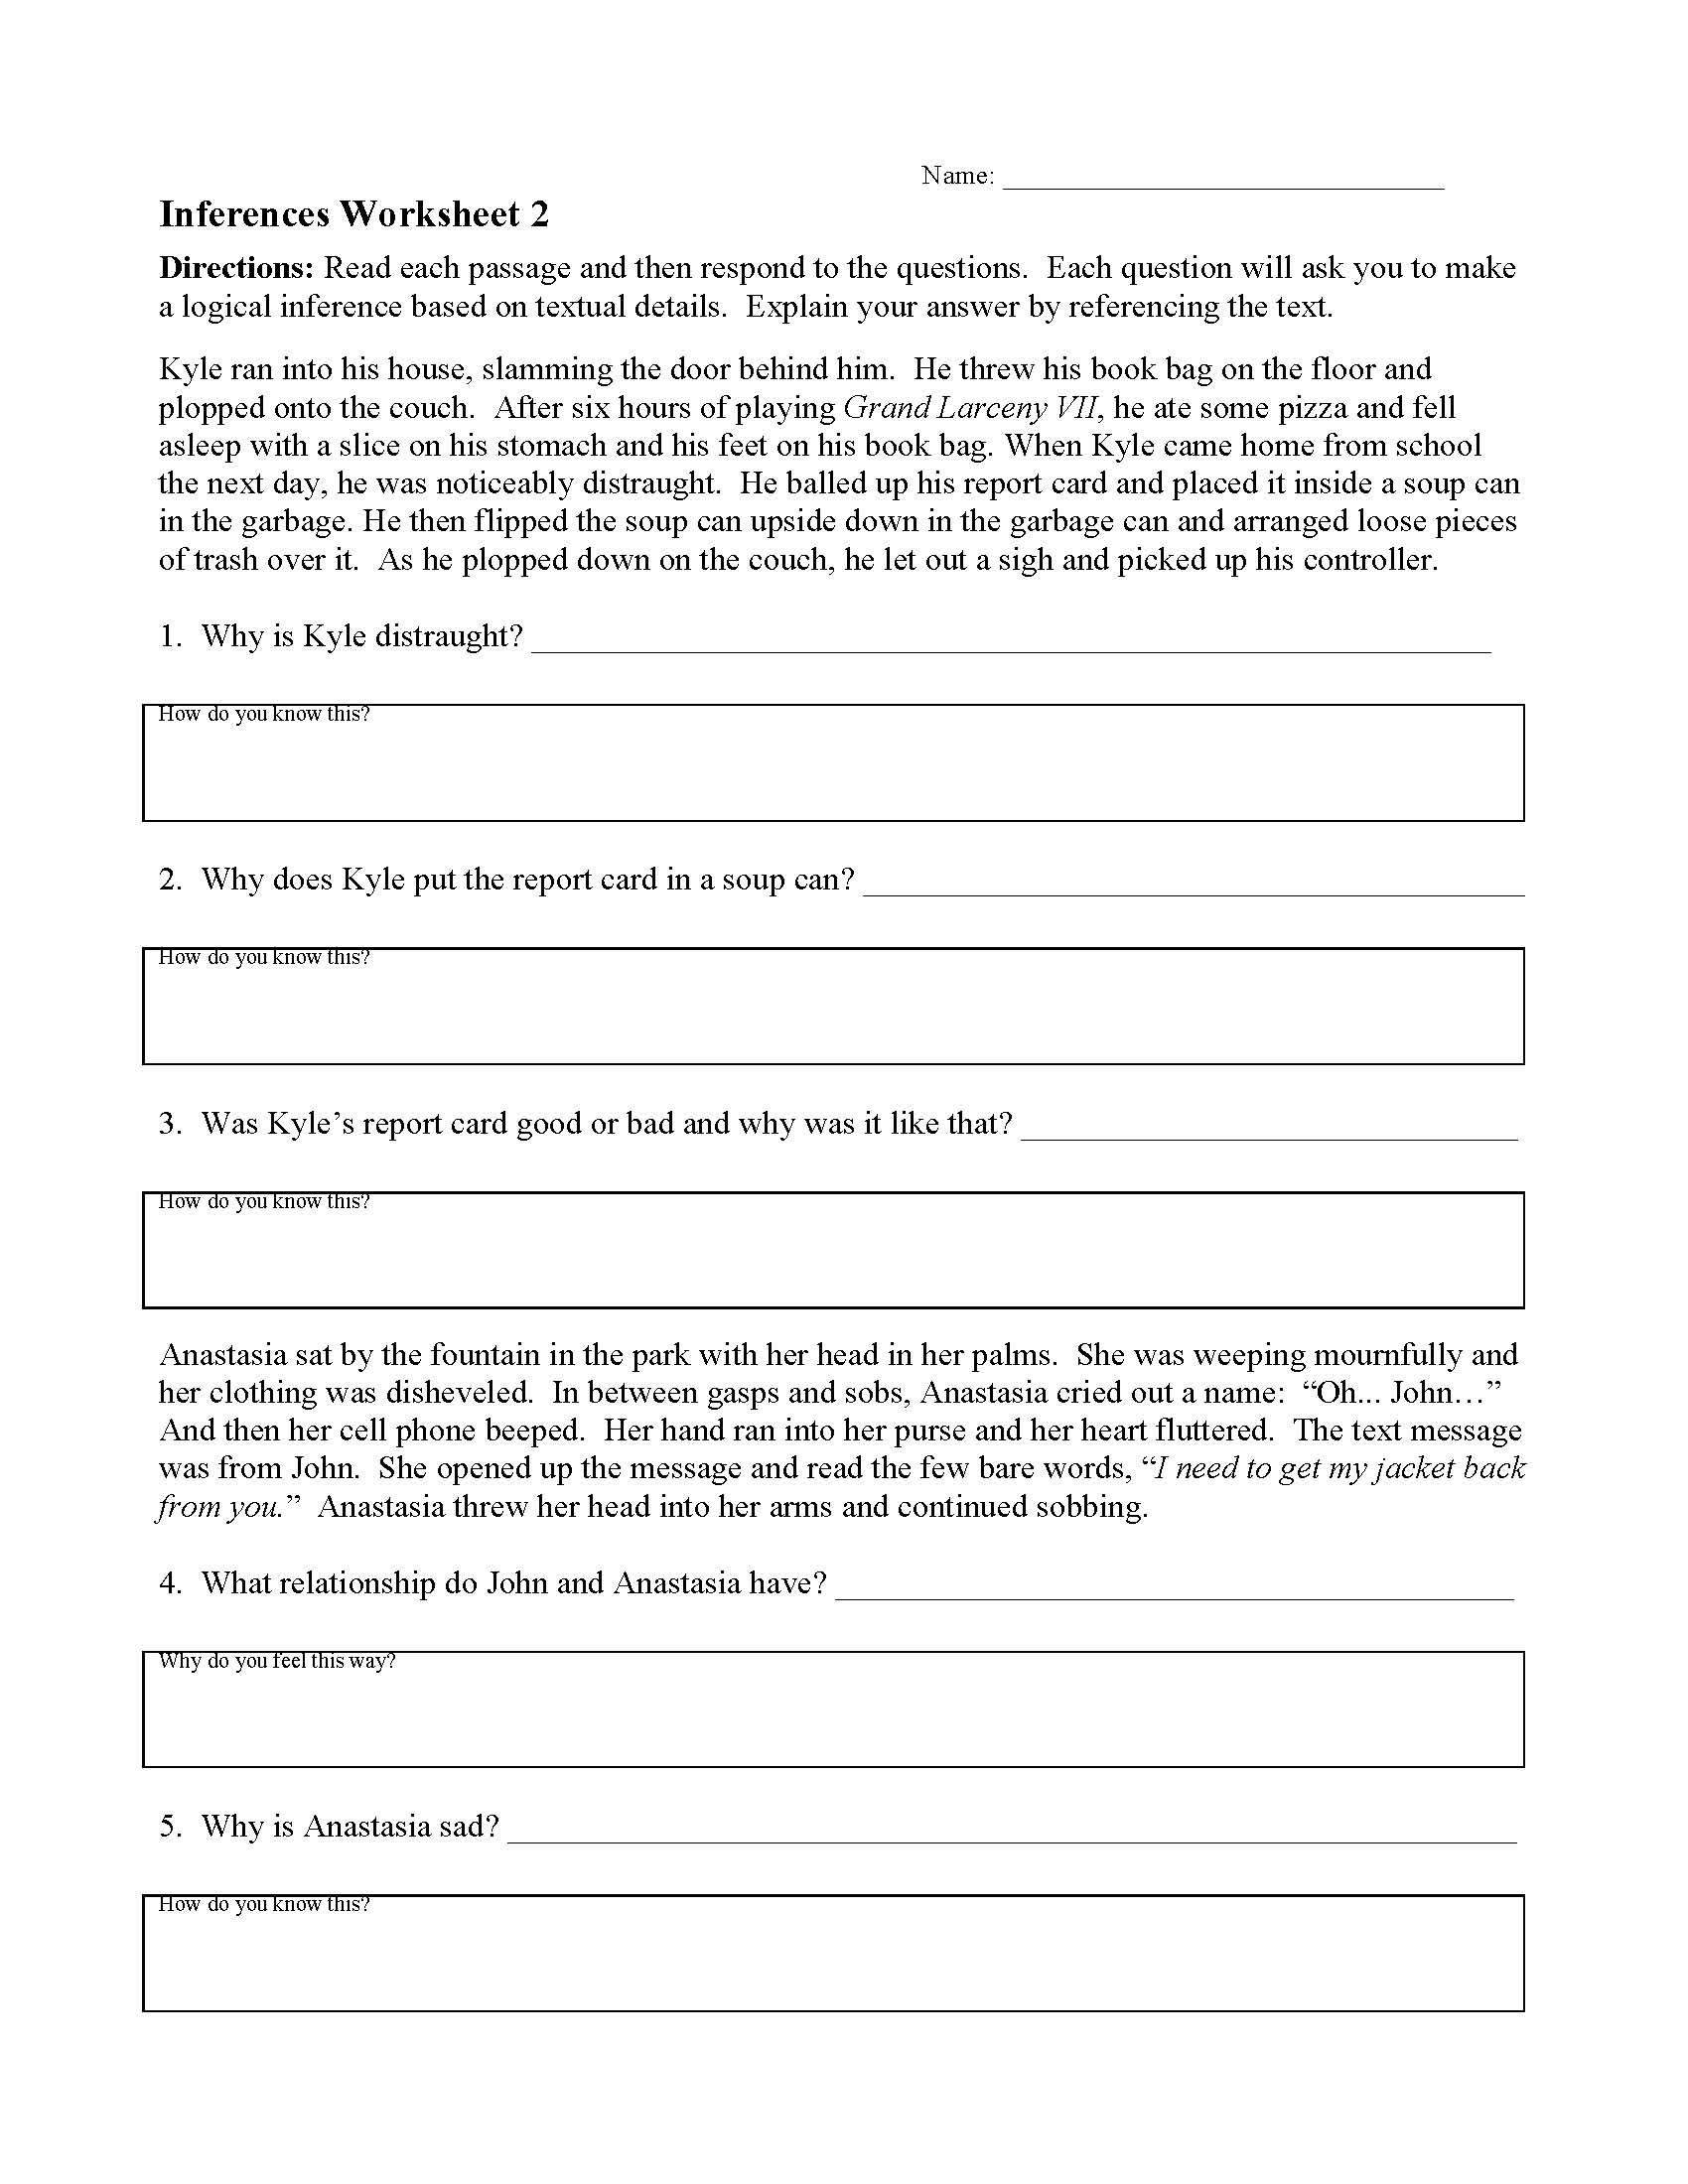 Inferences Worksheets  Ereading Worksheets Throughout Citing Textual Evidence Worksheet